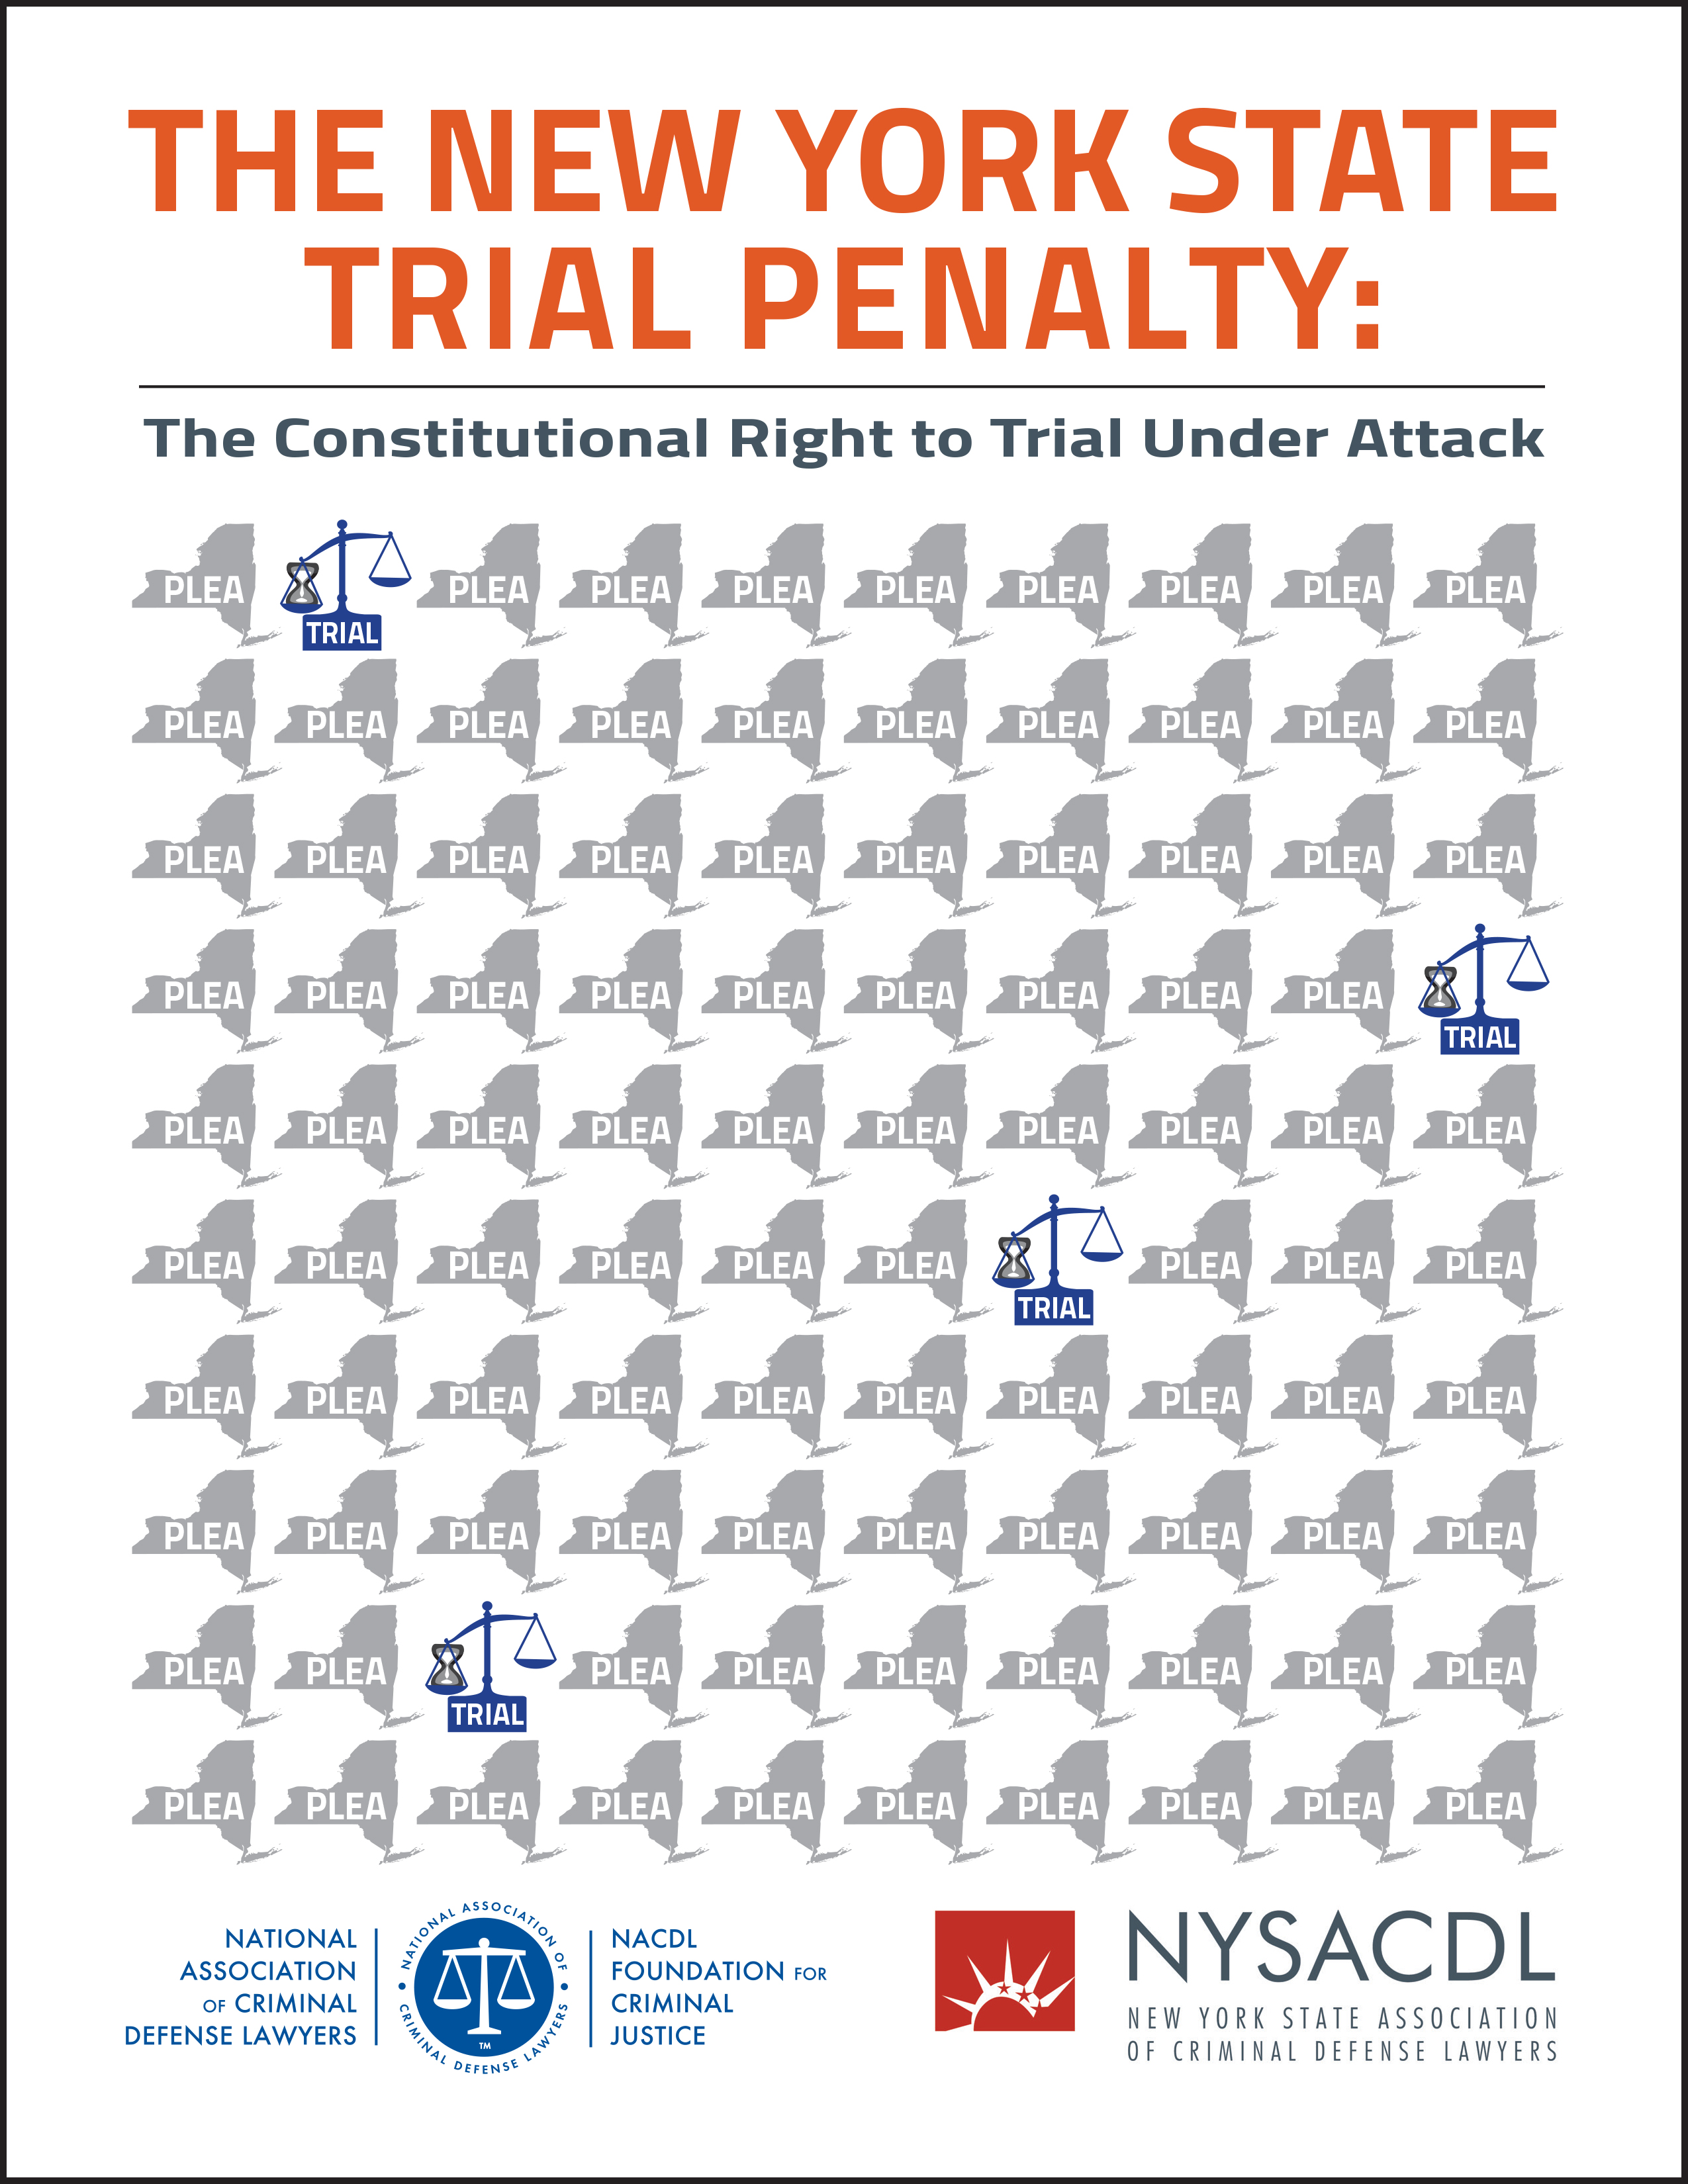 The New York State Trial Penalty report